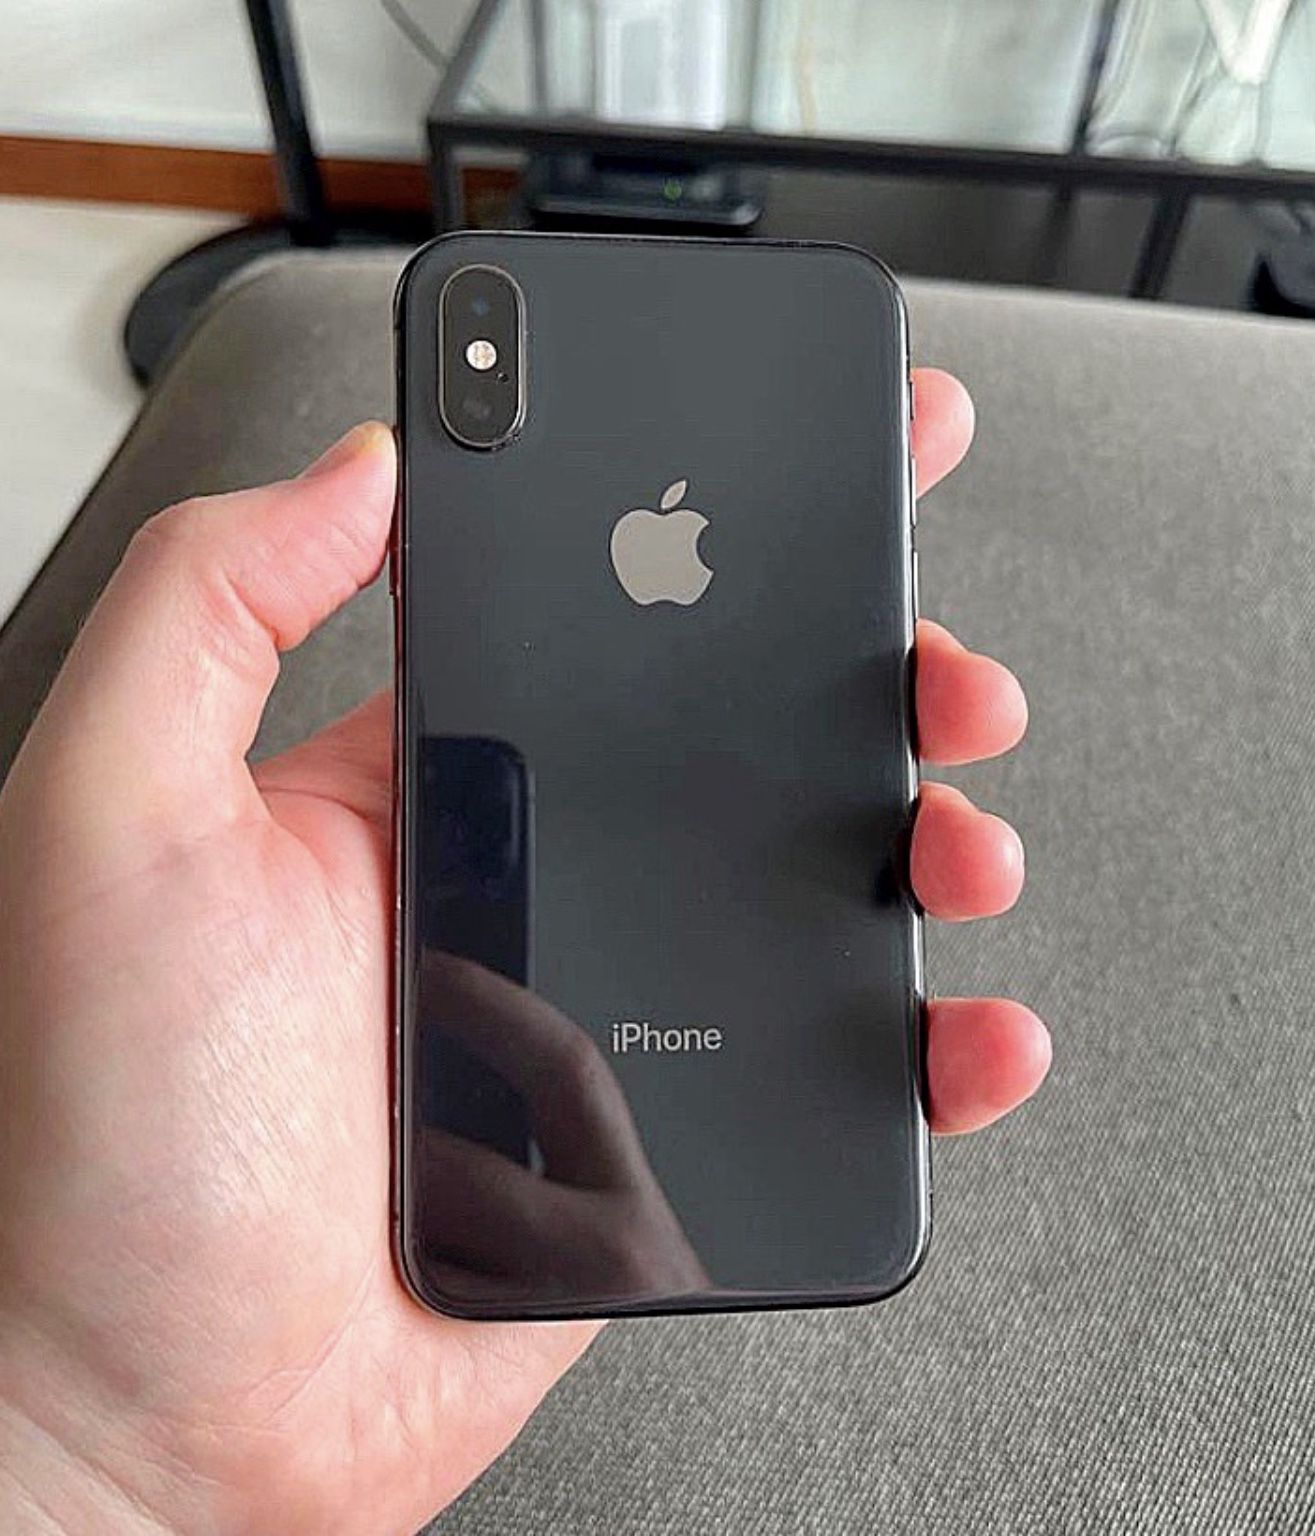 Apple iPhone xs max. 512gb. for Sale in Peoria, AZ - OfferUp